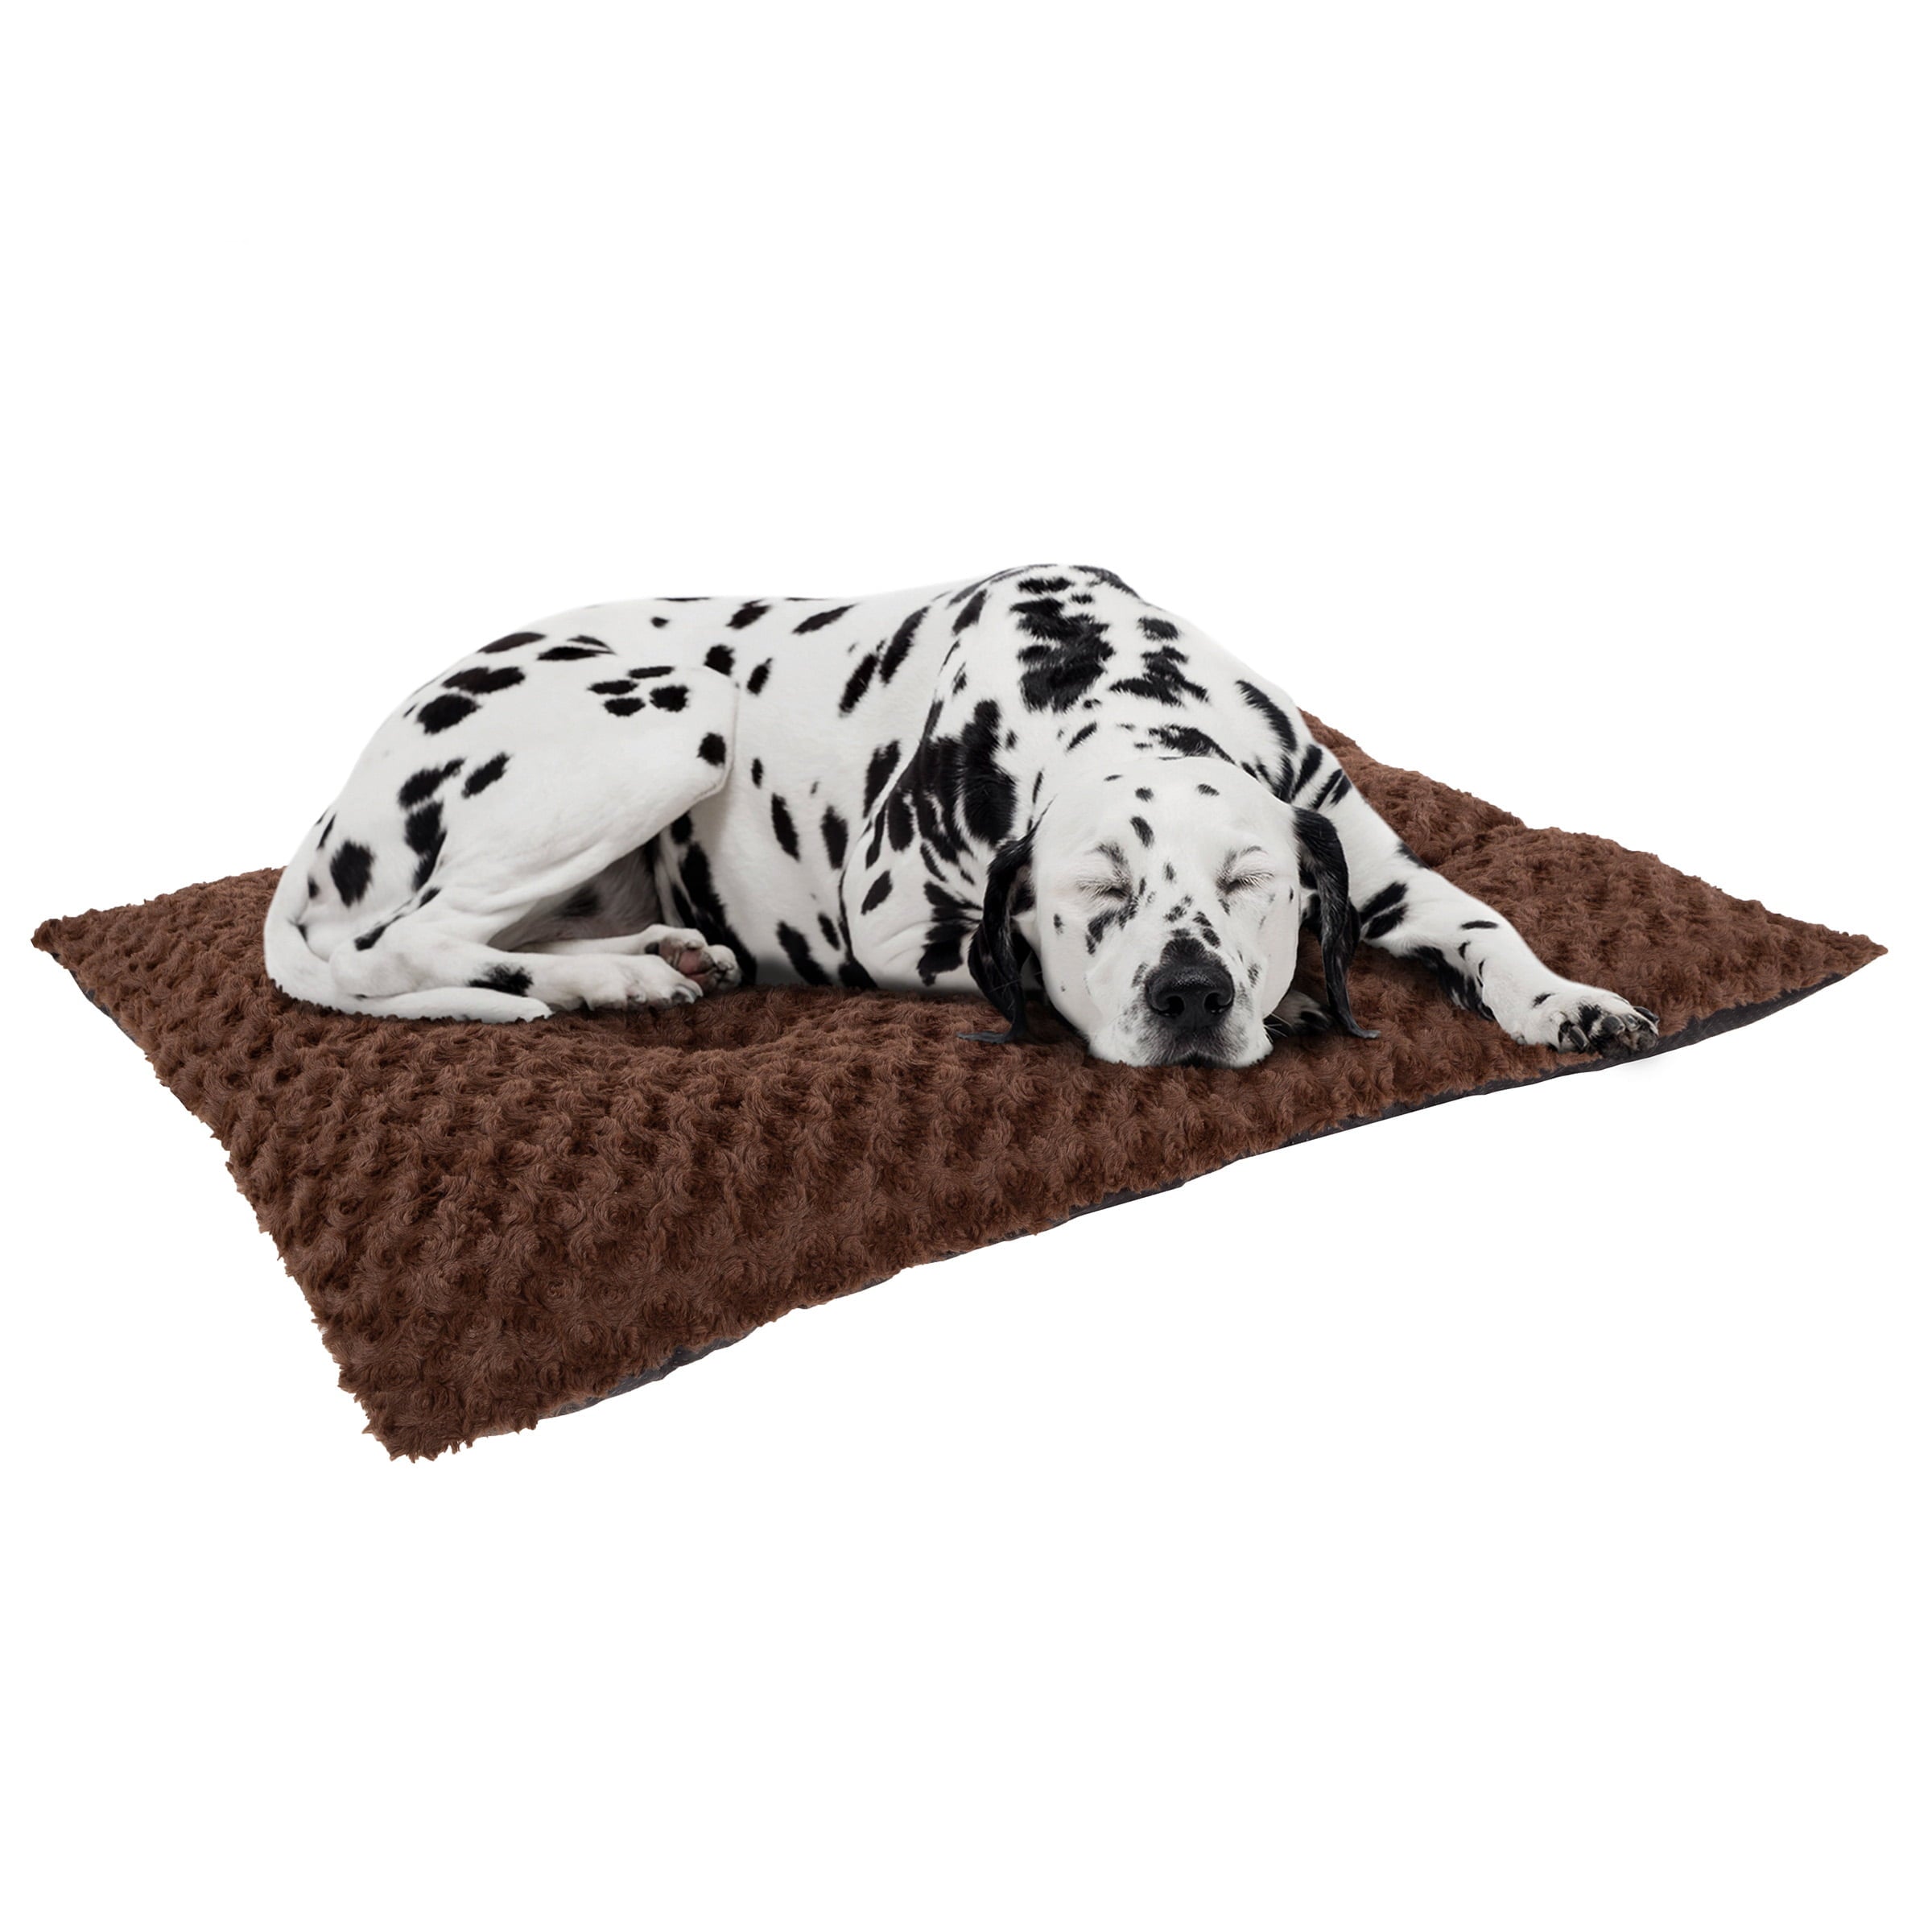 Dog Bed – 42x26 Large Pet Pillow and Crate Pad with Faux Fur Sleep Surface and Non-Slip Bottom – Machine Washable Dog Bed by PETMAKER (Brown)